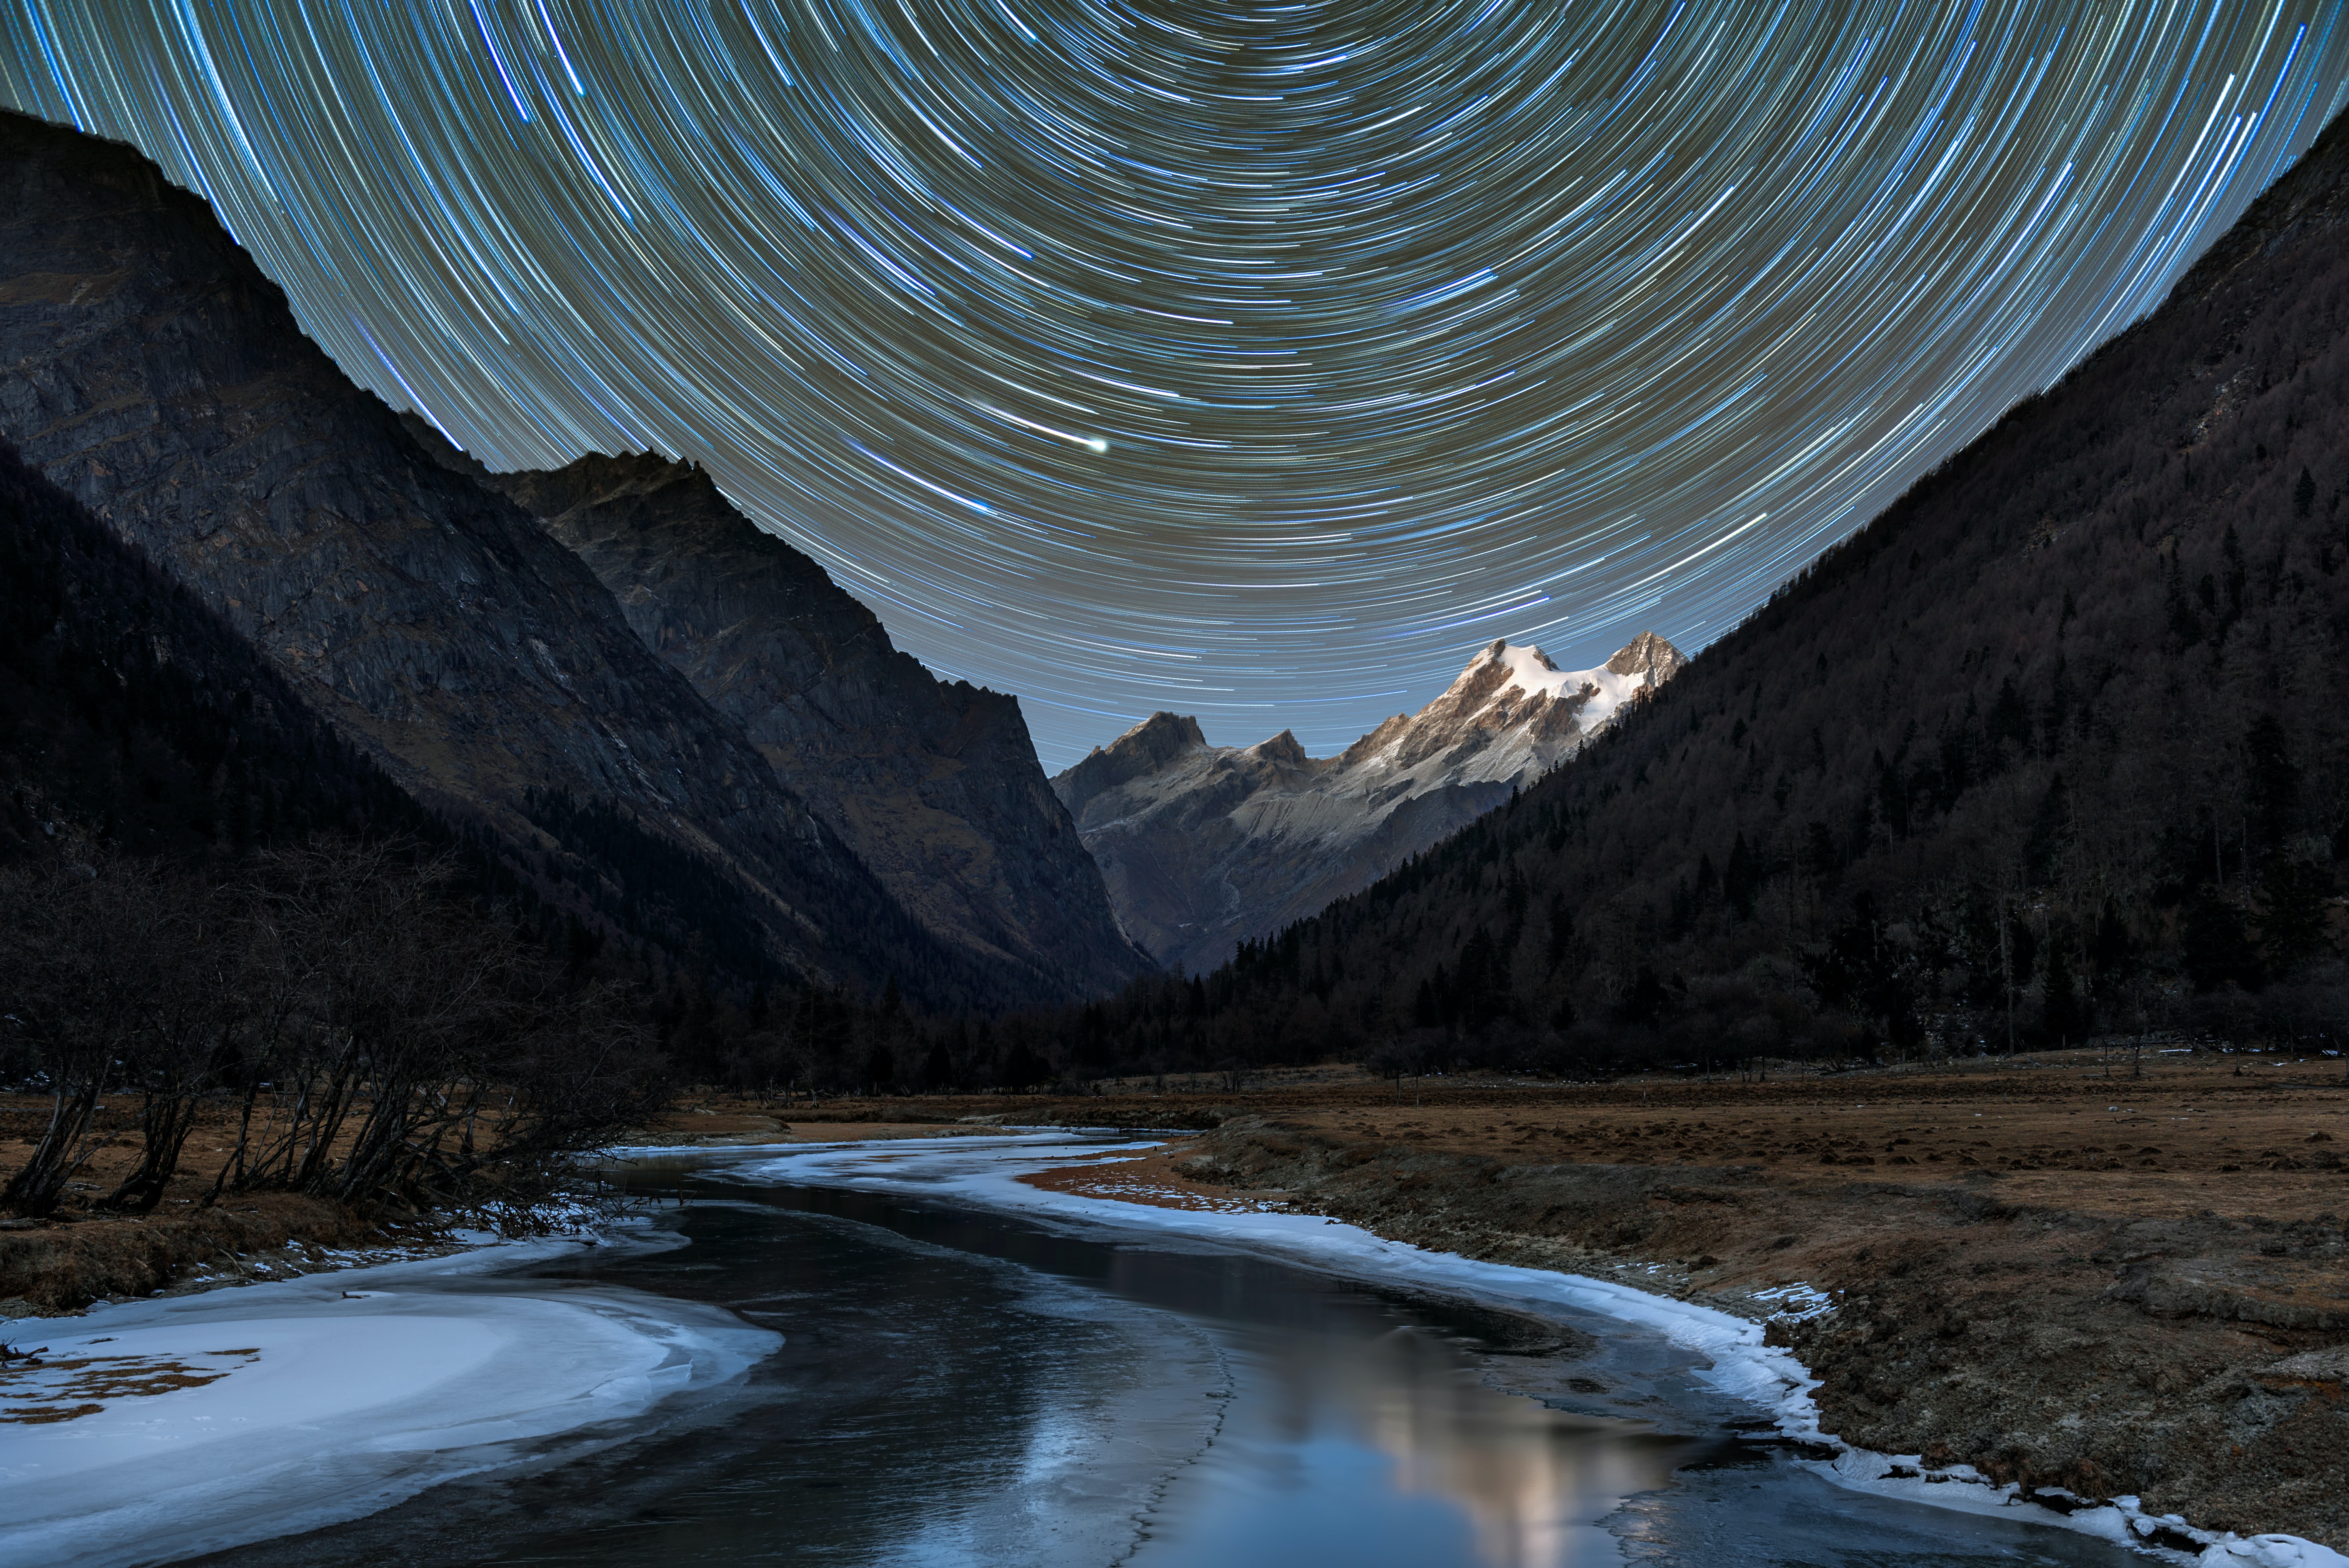 Nature Long Exposure Stars Circle Night River Snowy Peak Trees Forest Hills Ice Frozen River Sichuan 5942x3966